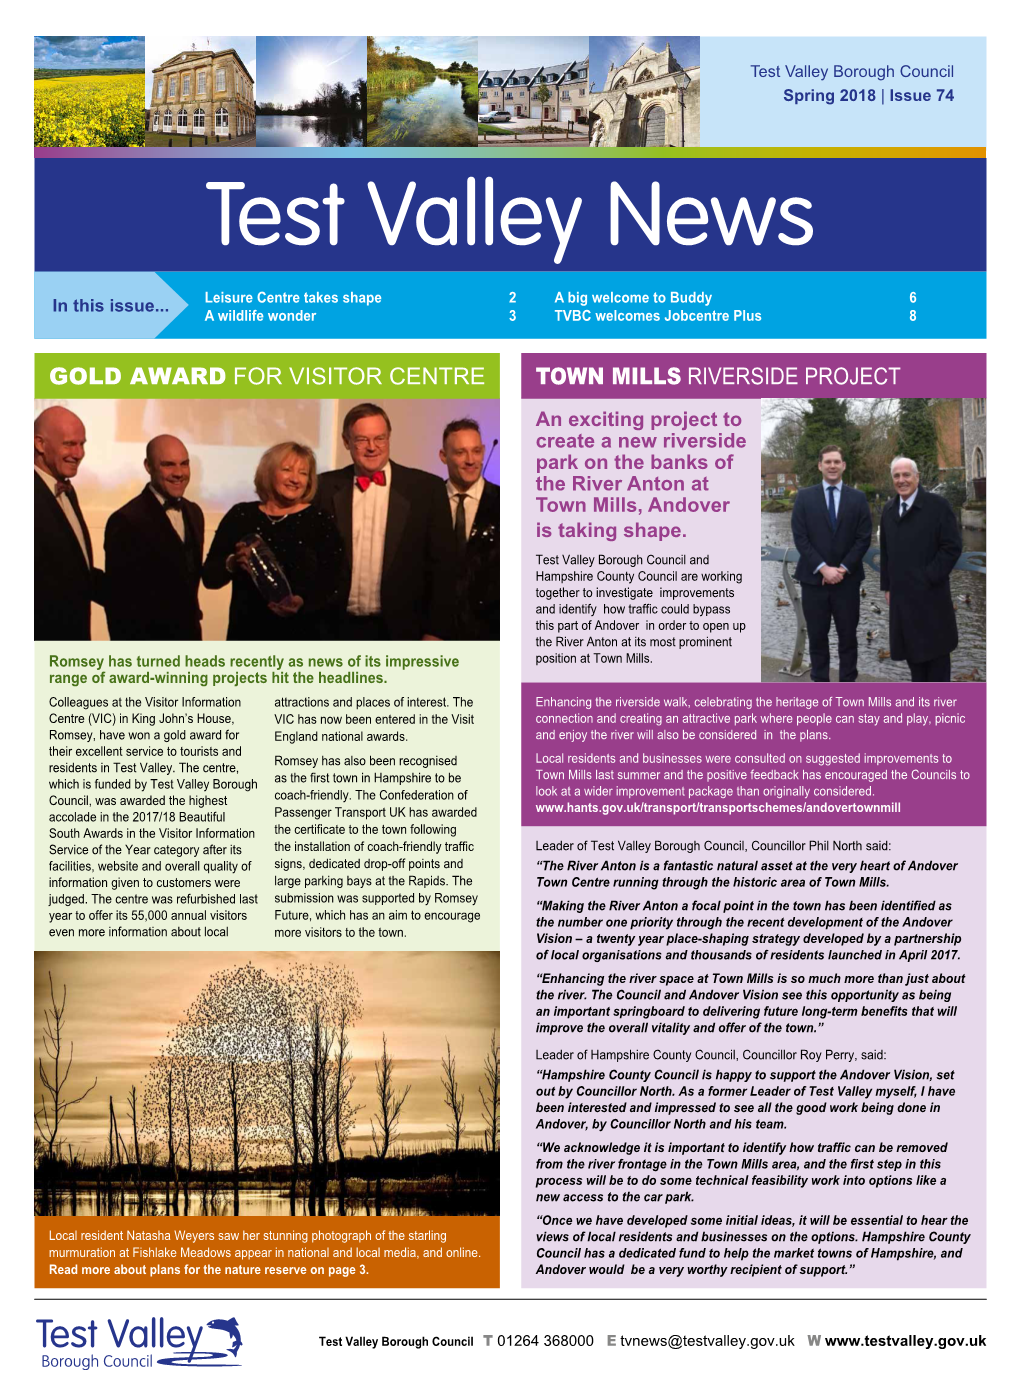 Test Valley News Edition 74 Spring 2018